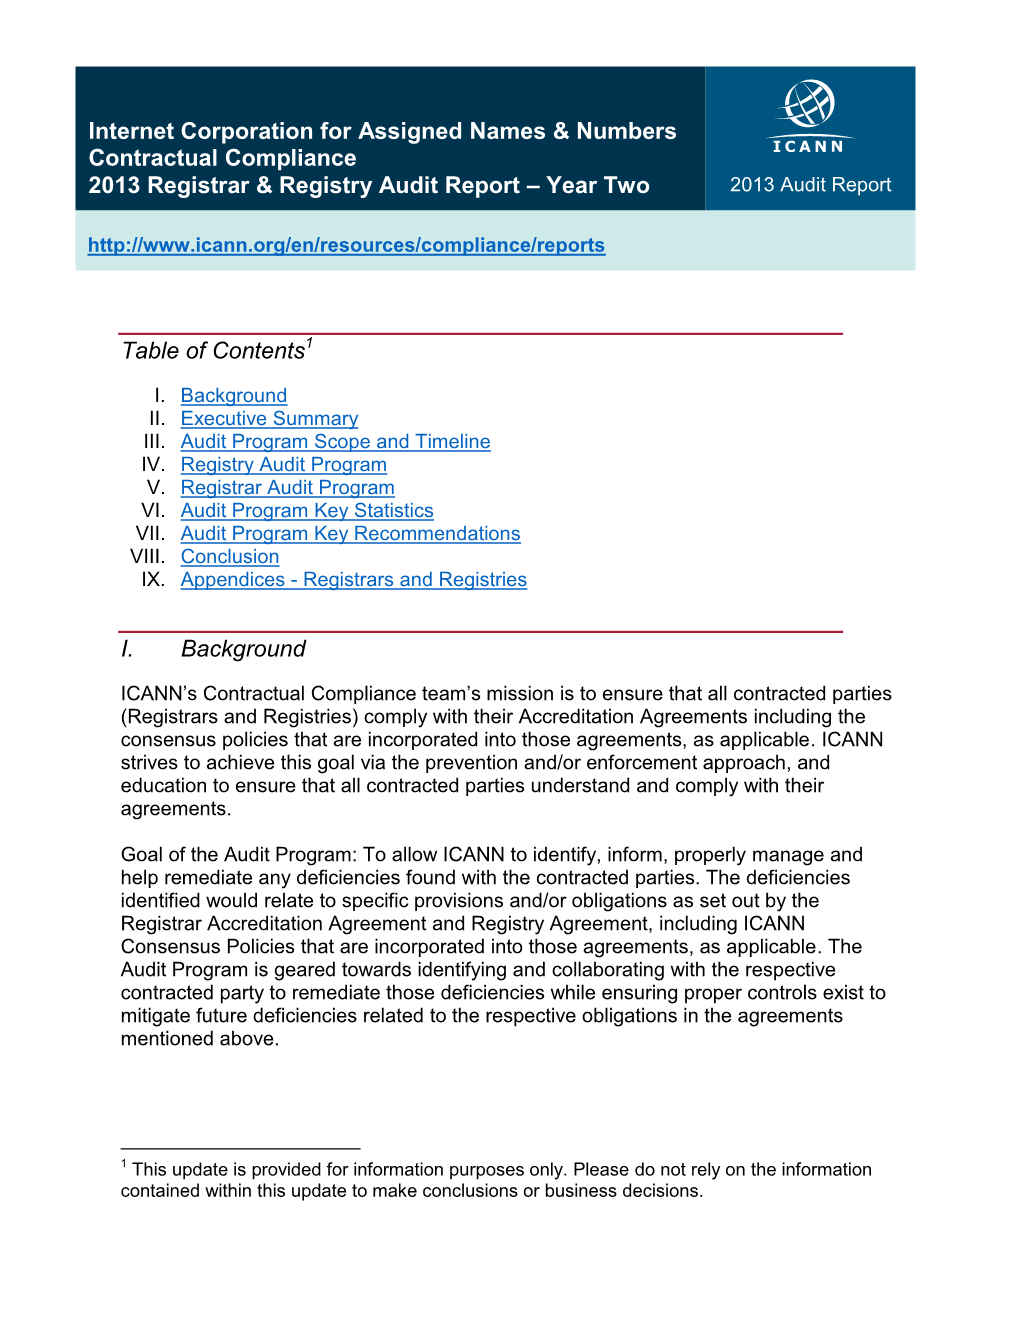 Internet Corporation for Assigned Names & Numbers Contractual Compliance 2013 Registrar & Registry Audit Report